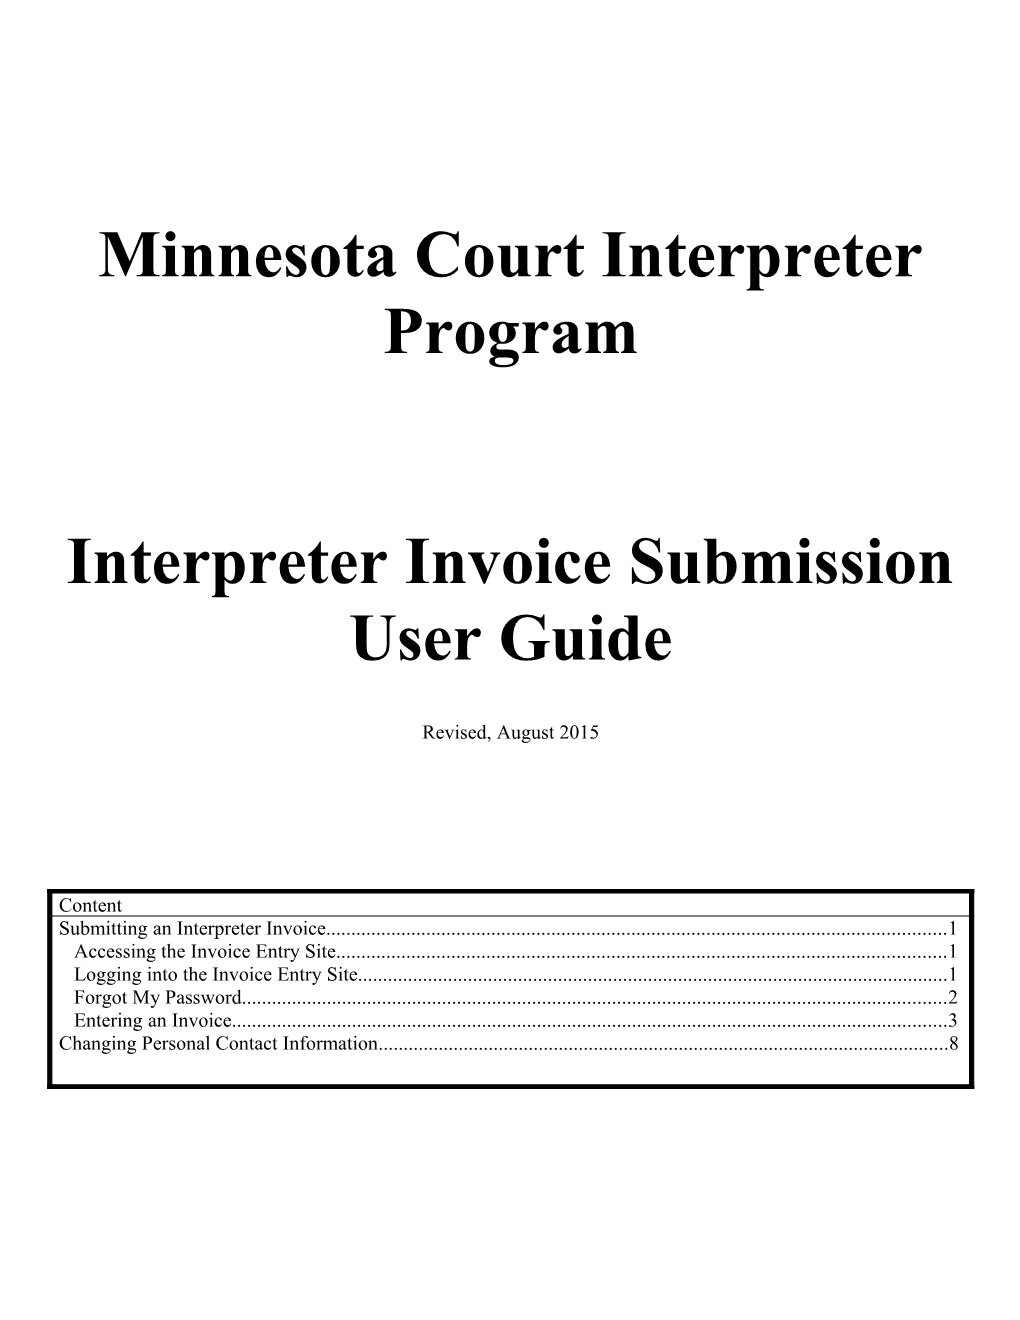 Submitting an Interpreter Invoice